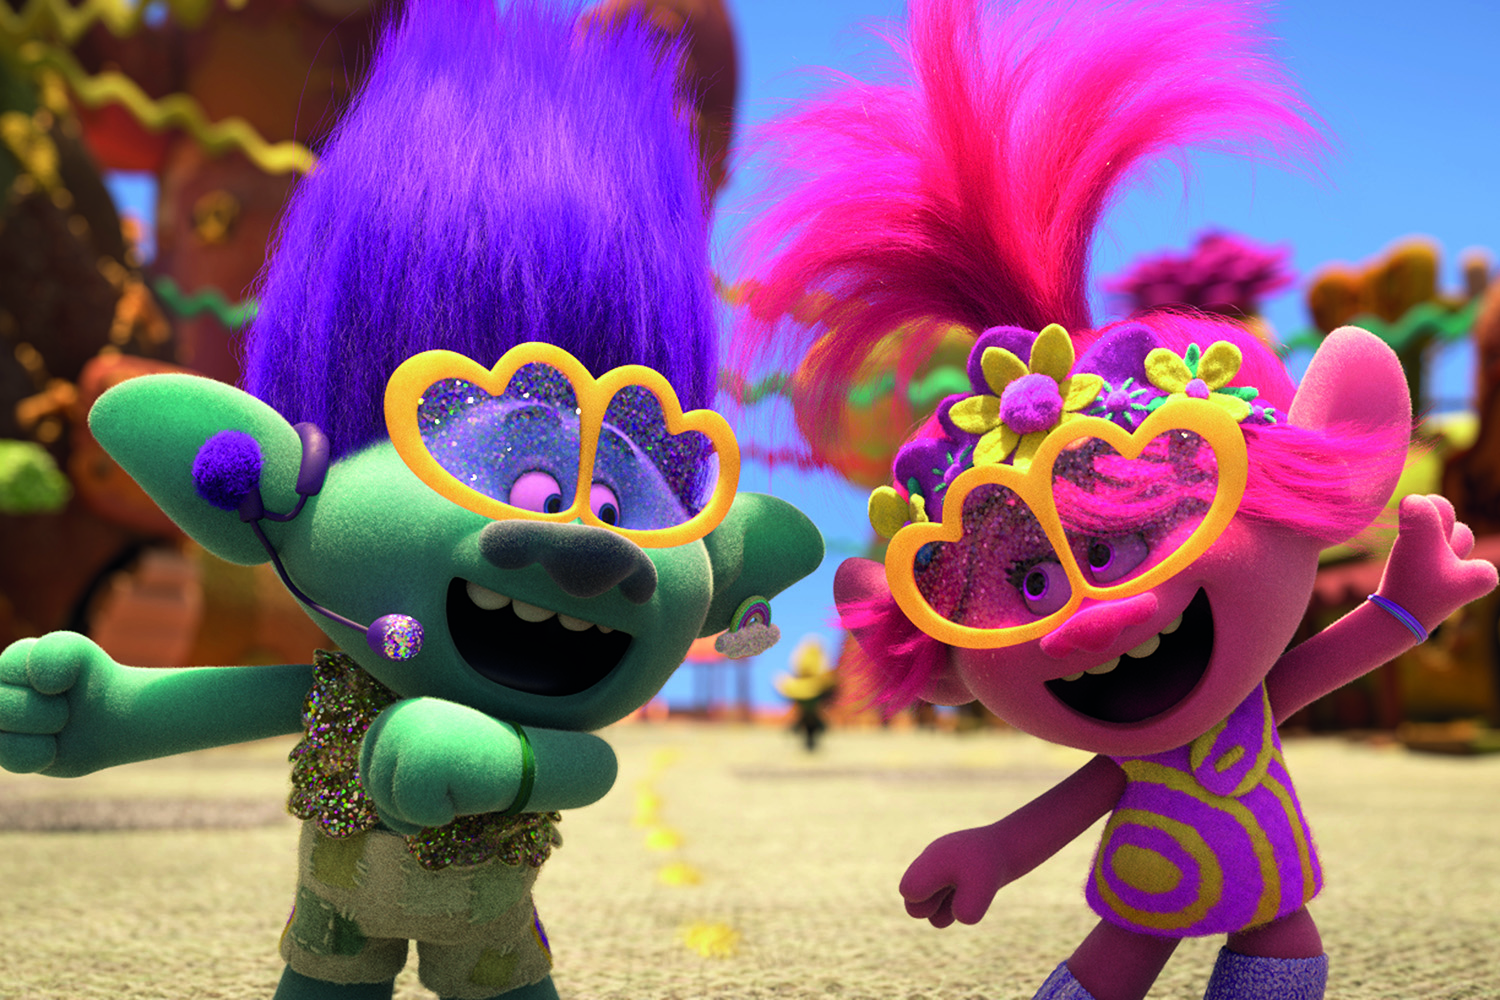 Trolls World Tour review - a visual spectacle full of toe-tapping